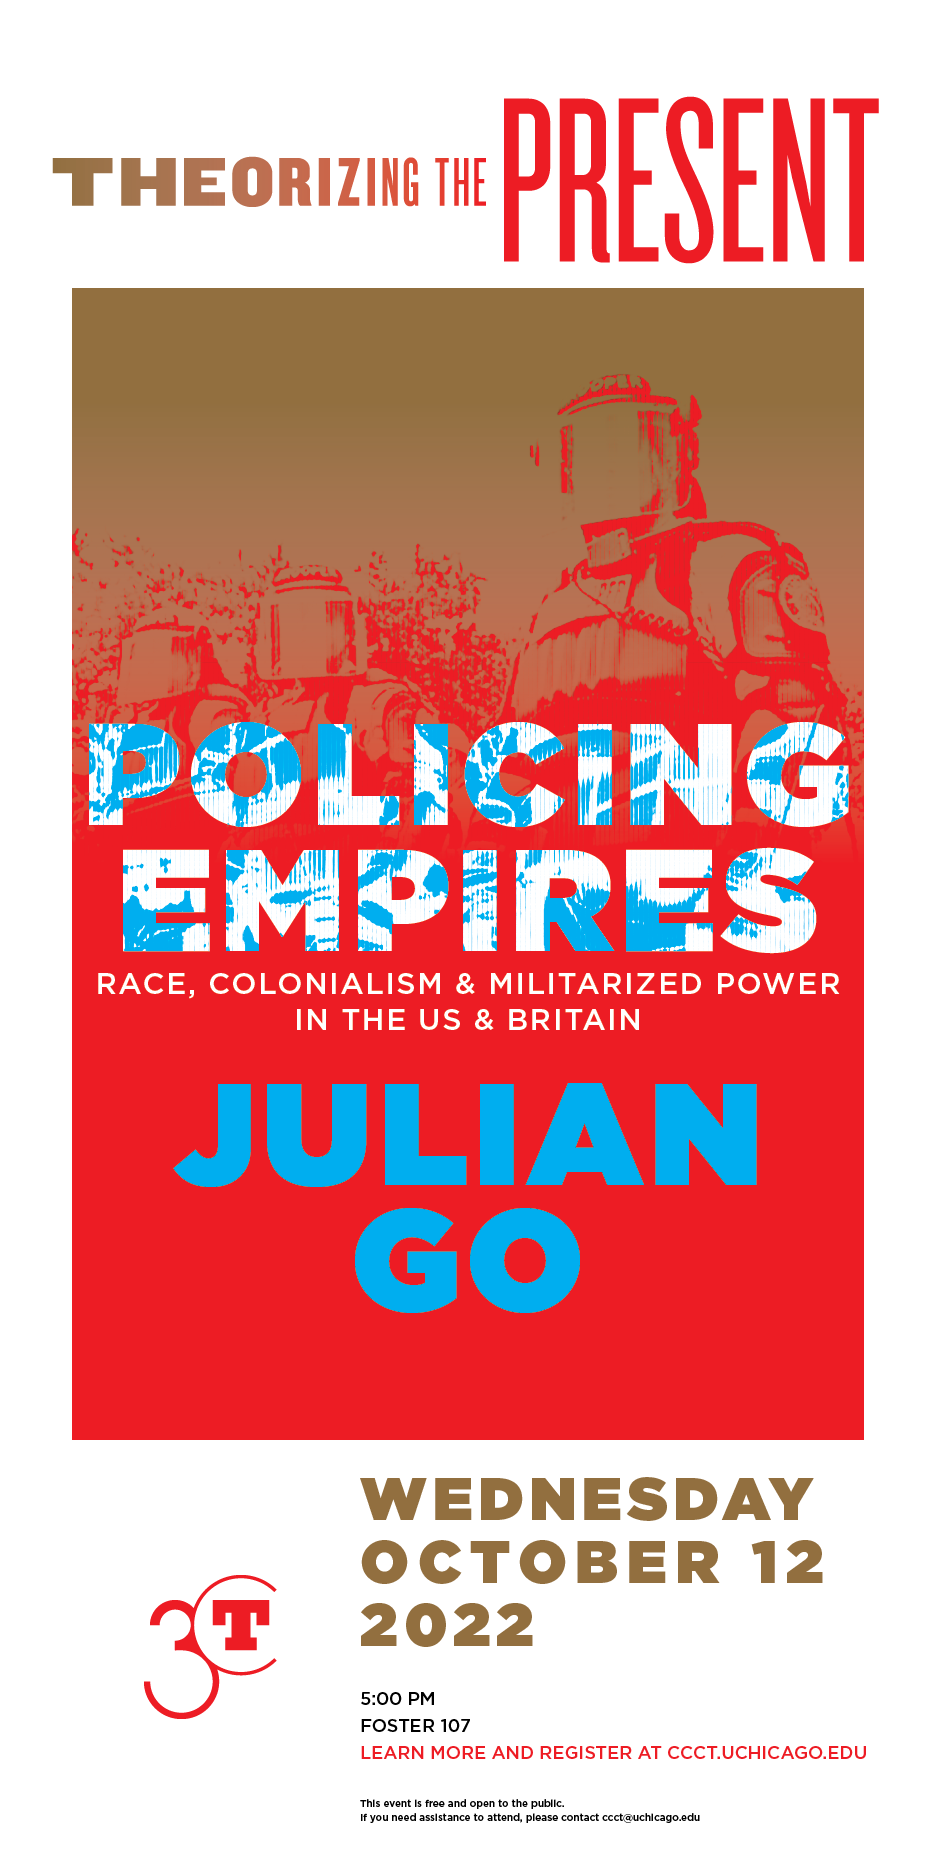 Poster for Policing Empires by Julian Go. Blue and white text over a red monochrome image of police in riot gear.